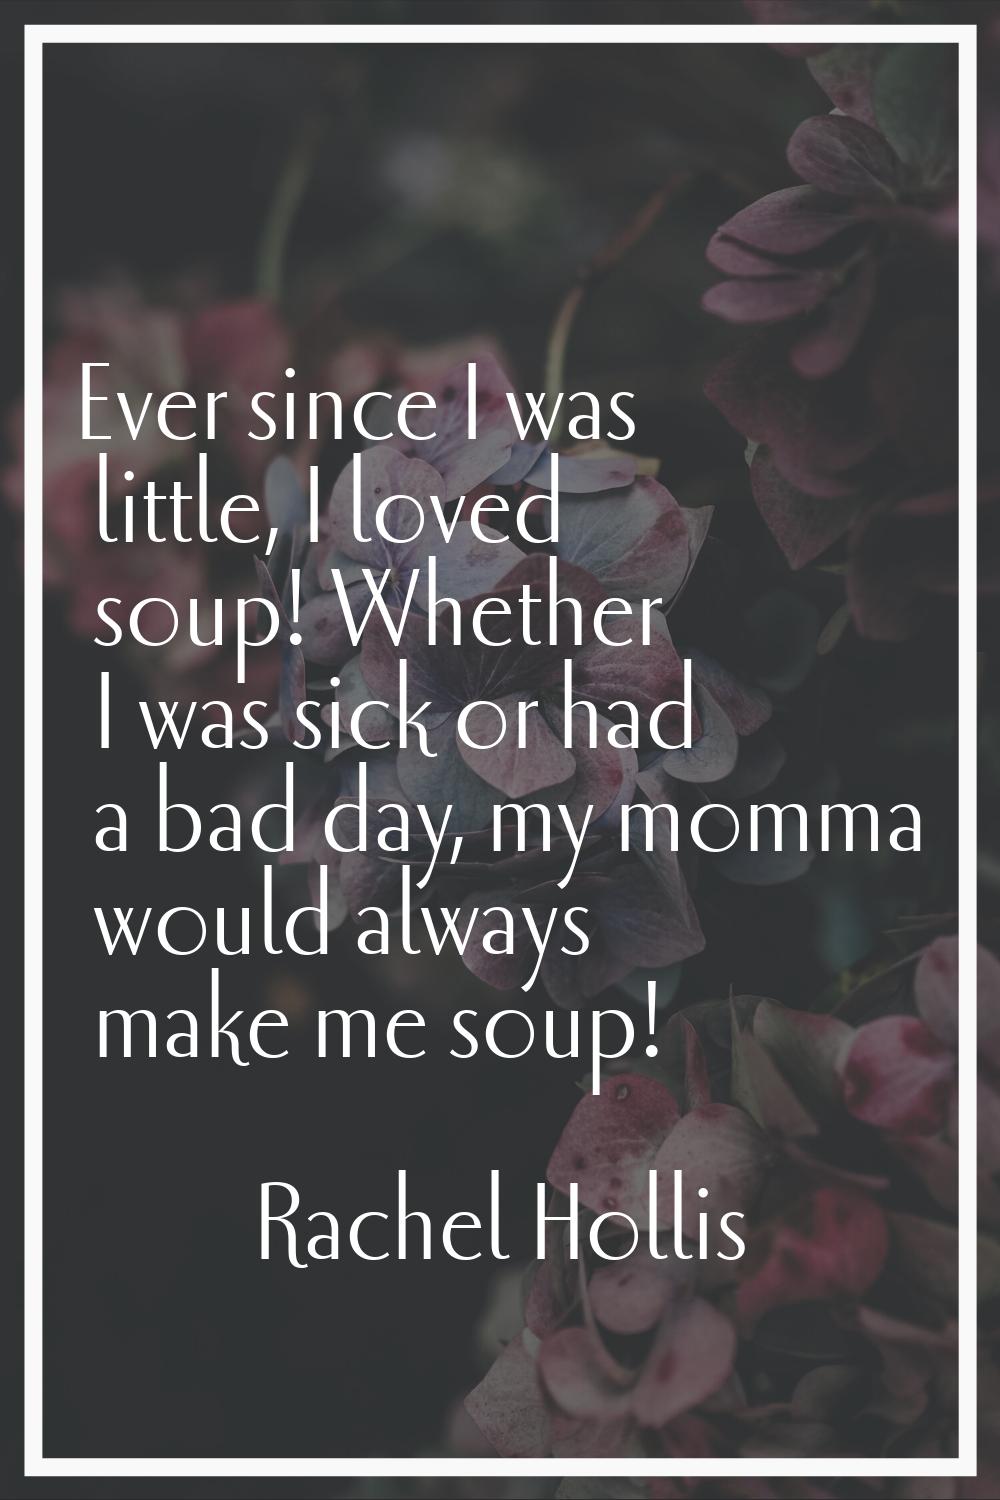 Ever since I was little, I loved soup! Whether I was sick or had a bad day, my momma would always m